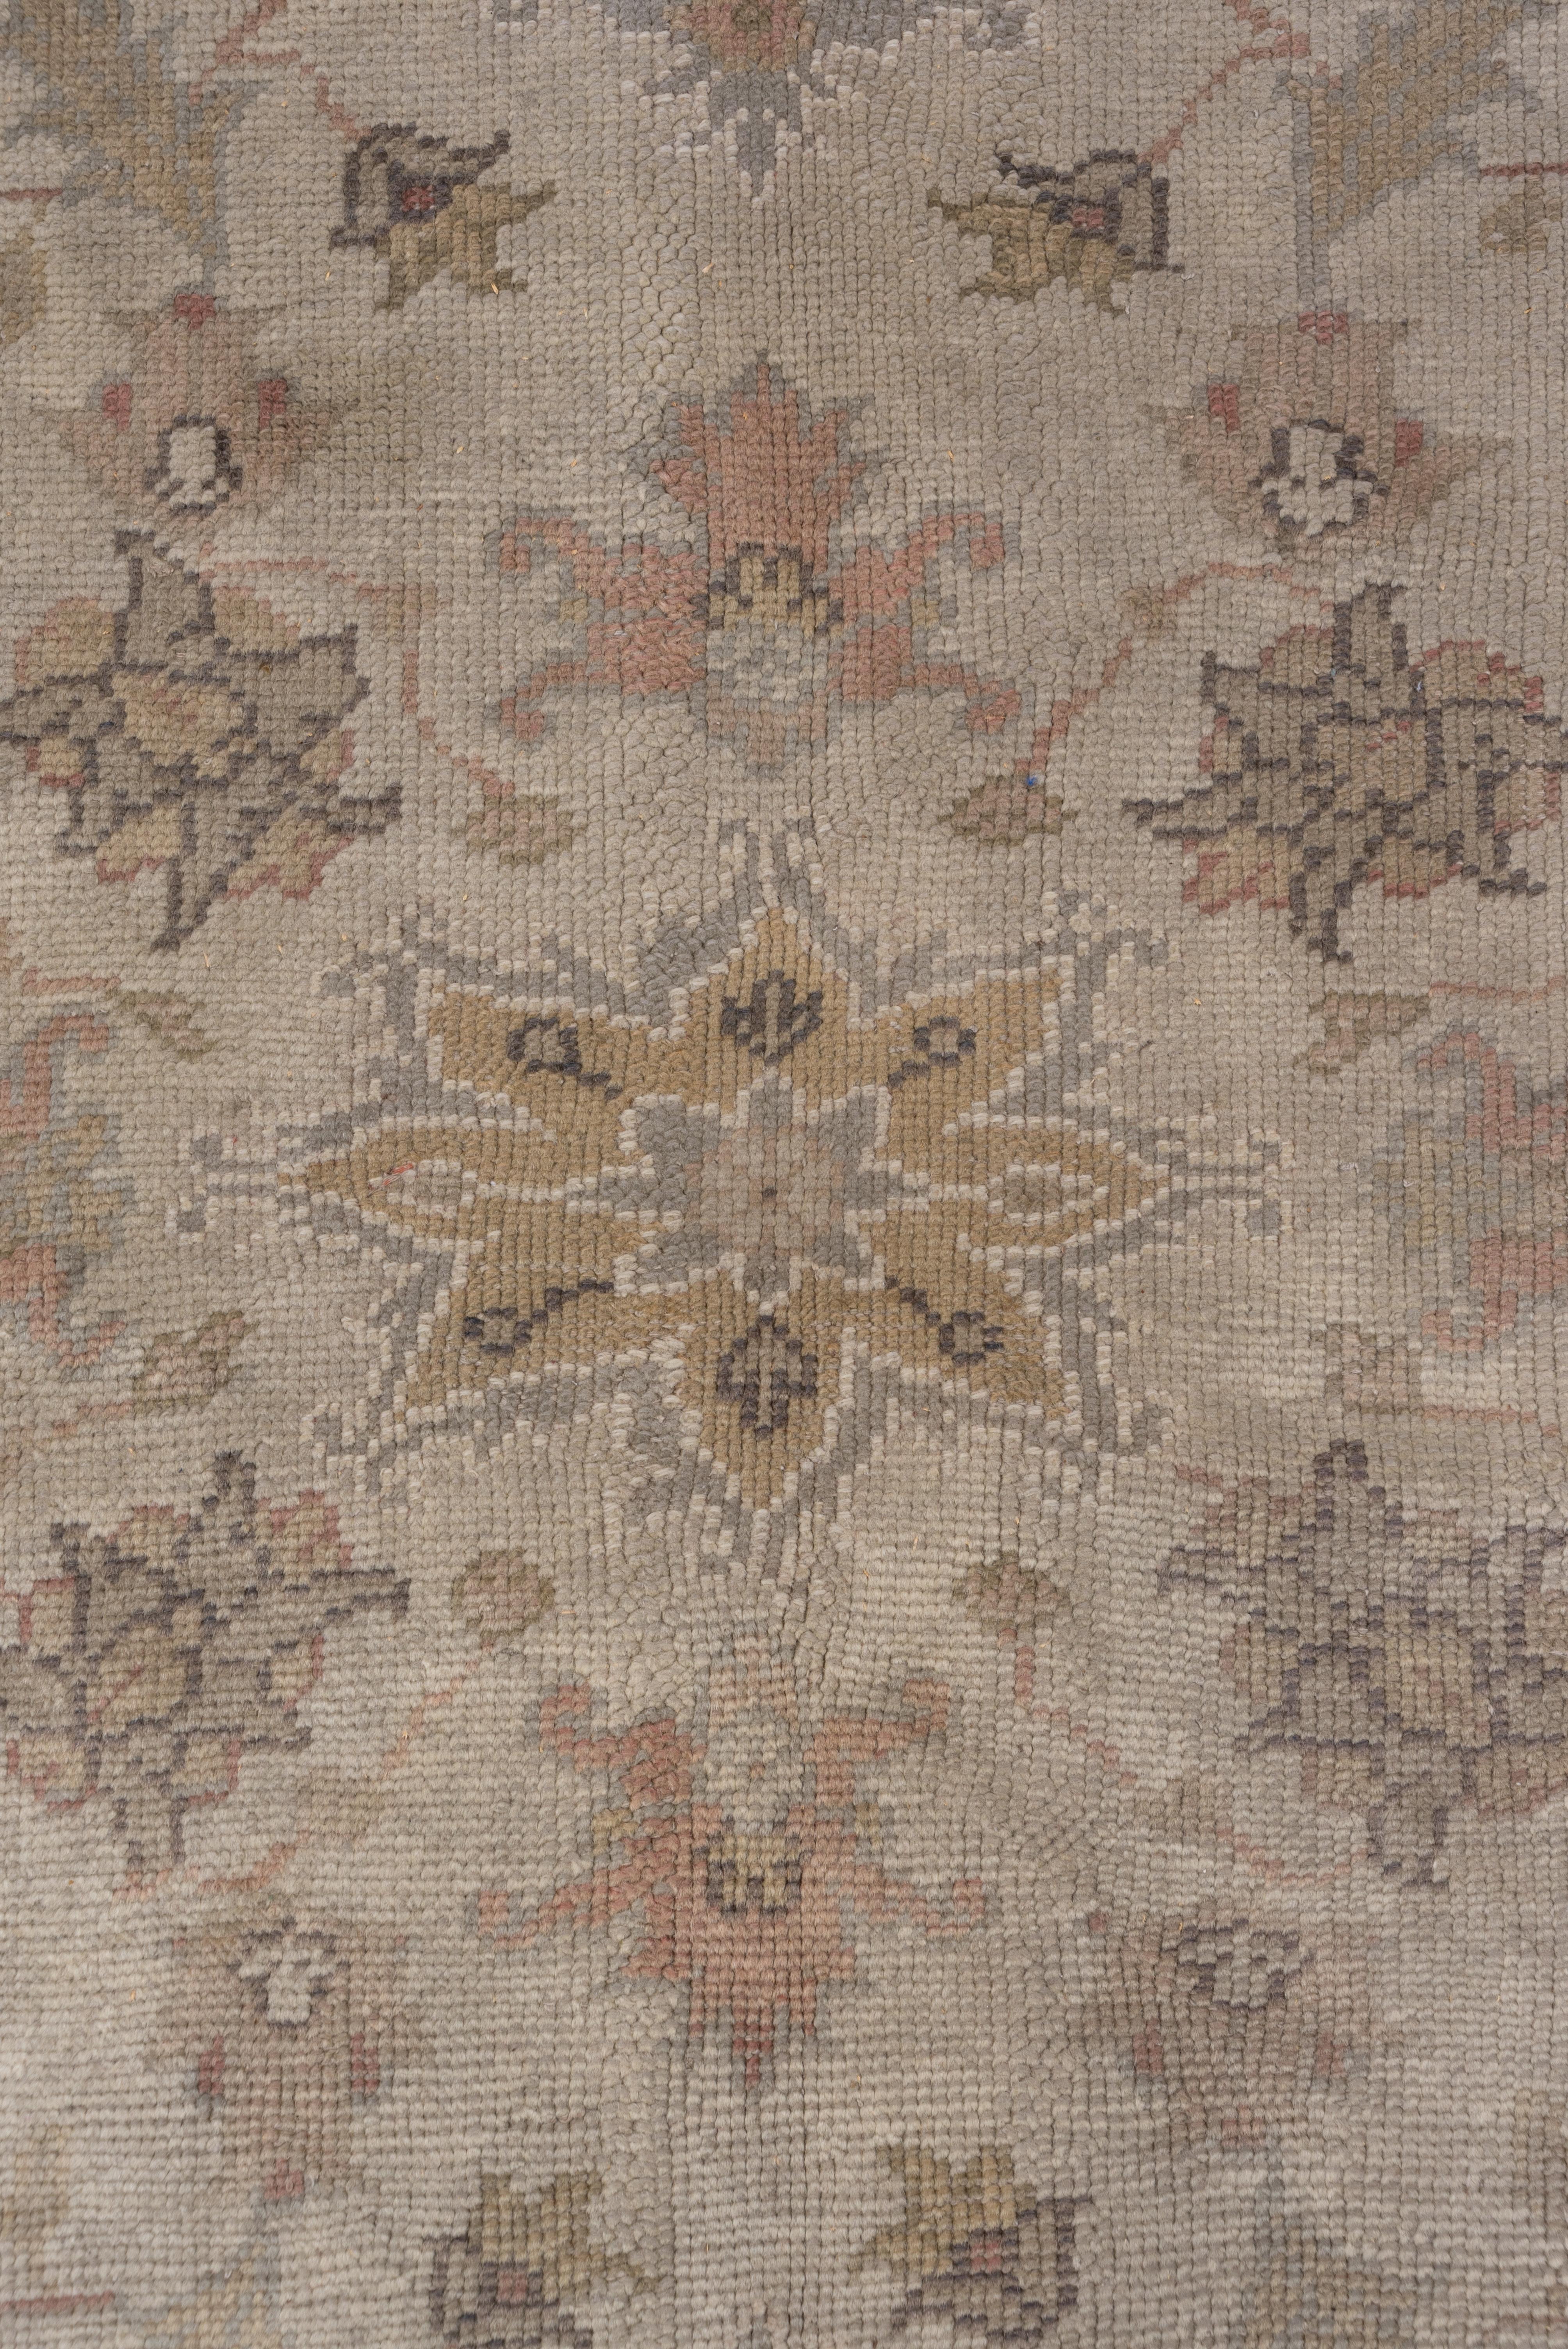 Palmettes, broken stems, small leaves and rosette flowers form an all-over pattern around a larger petaled octofoil palmette/rosette detailed in buff, ivory and pale green on the sandy beige field. Leafy palmettes float on the flesh-tone main